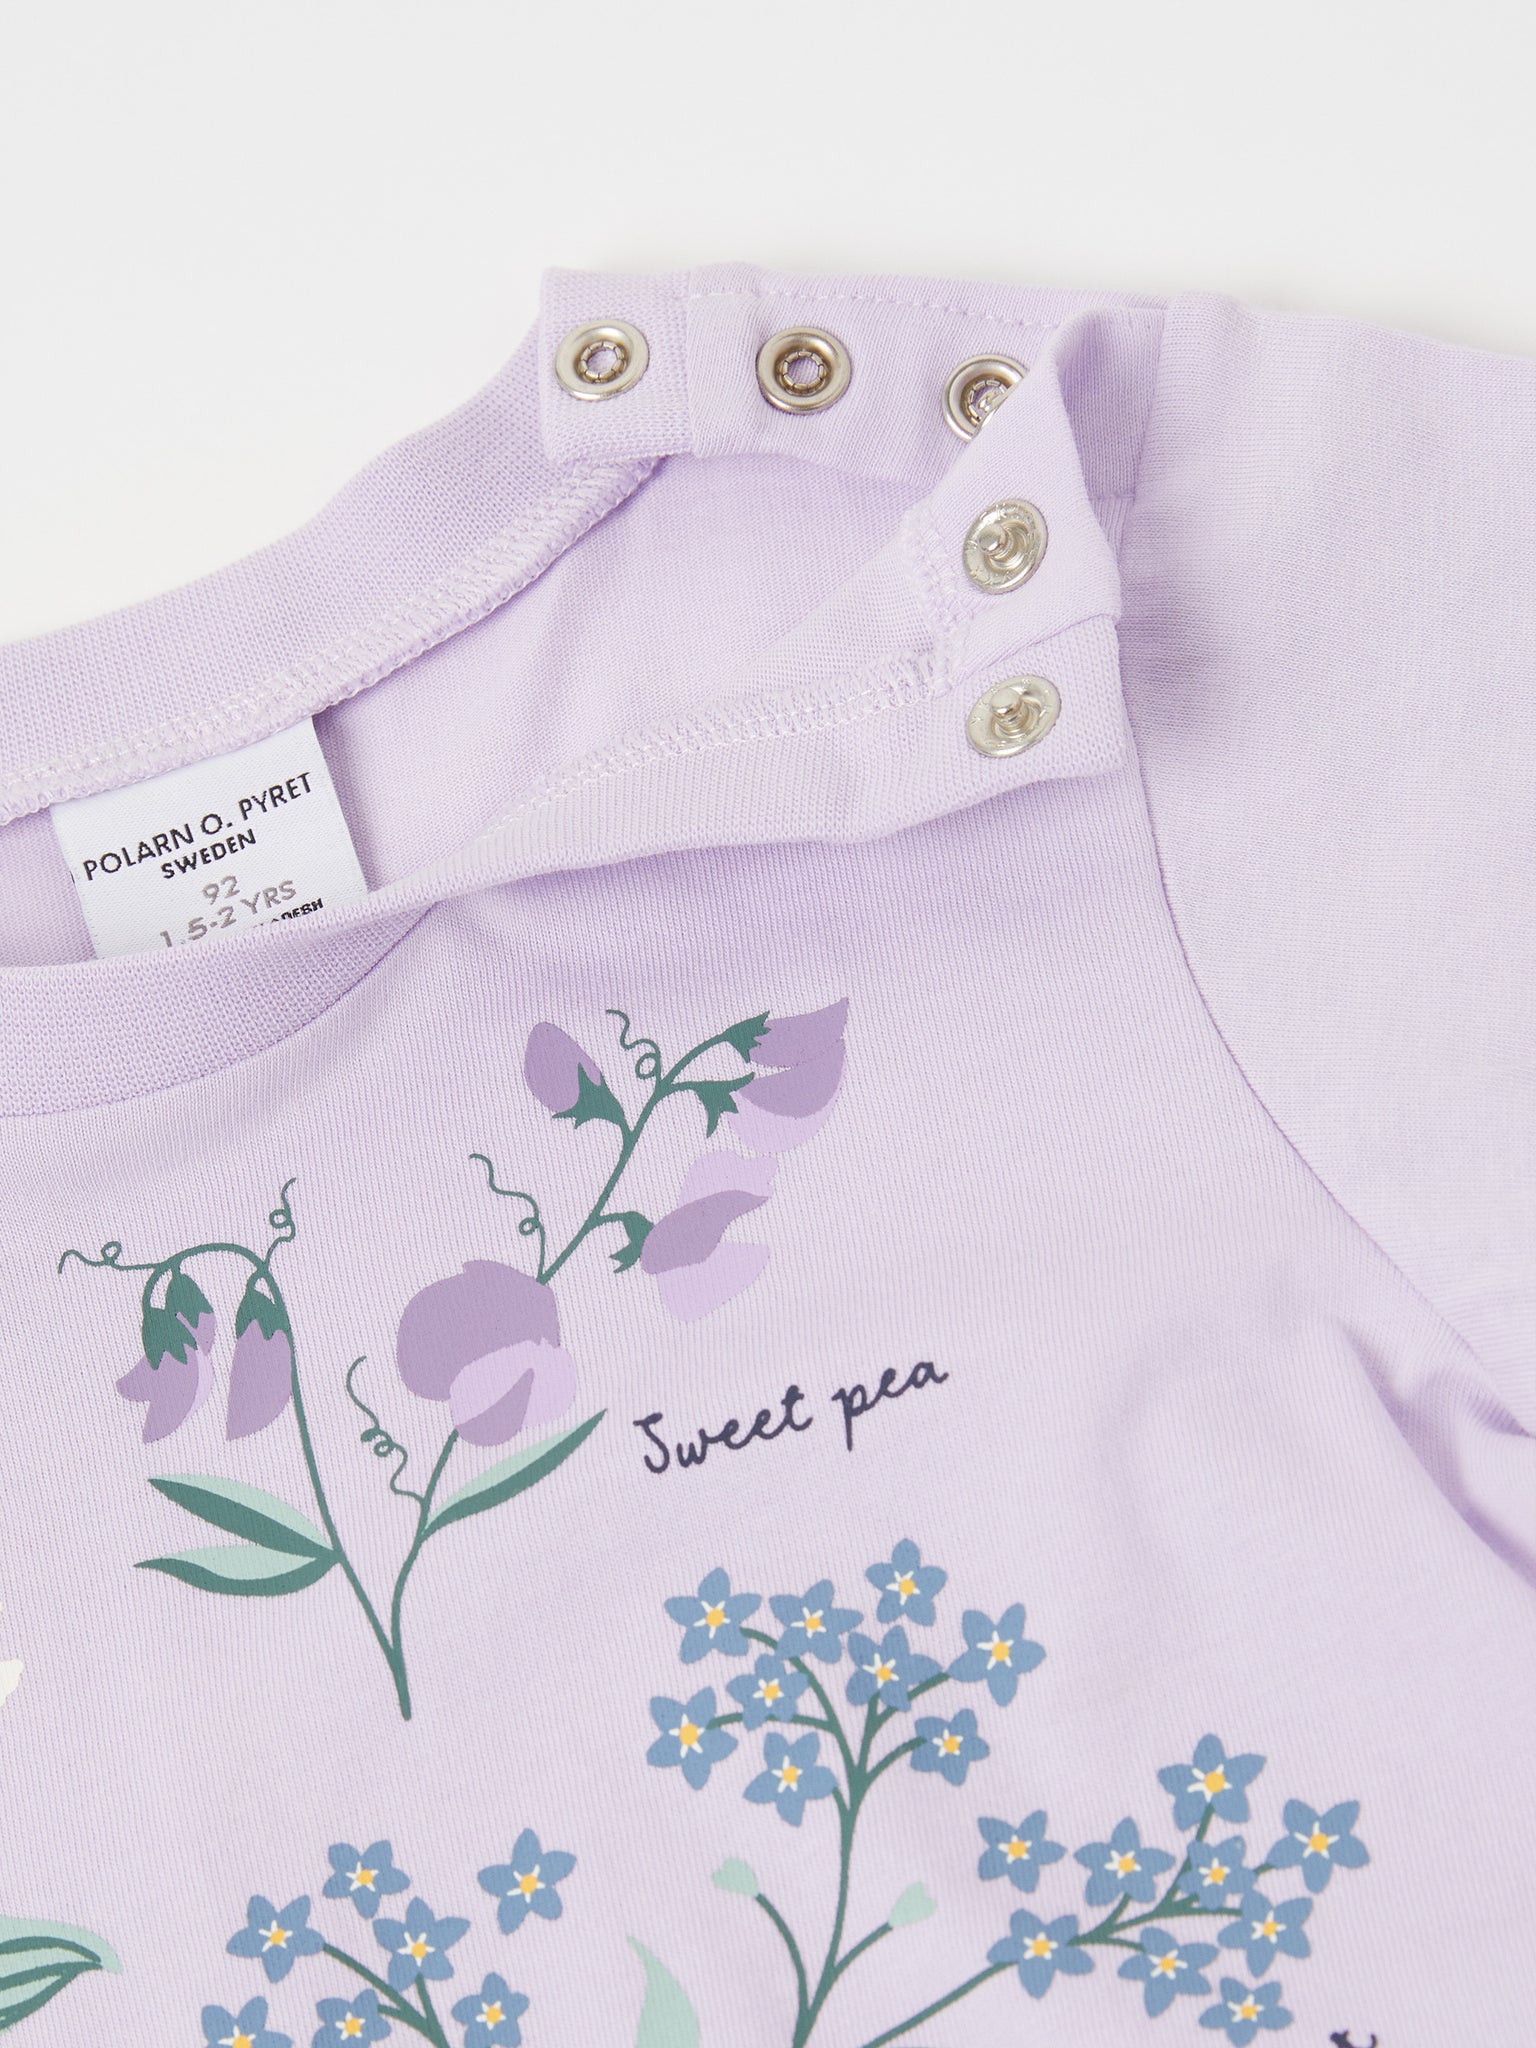 Cotton Kids Floral Print T-Shirt from the Polarn O. Pyret kidswear collection. The best ethical kids clothes